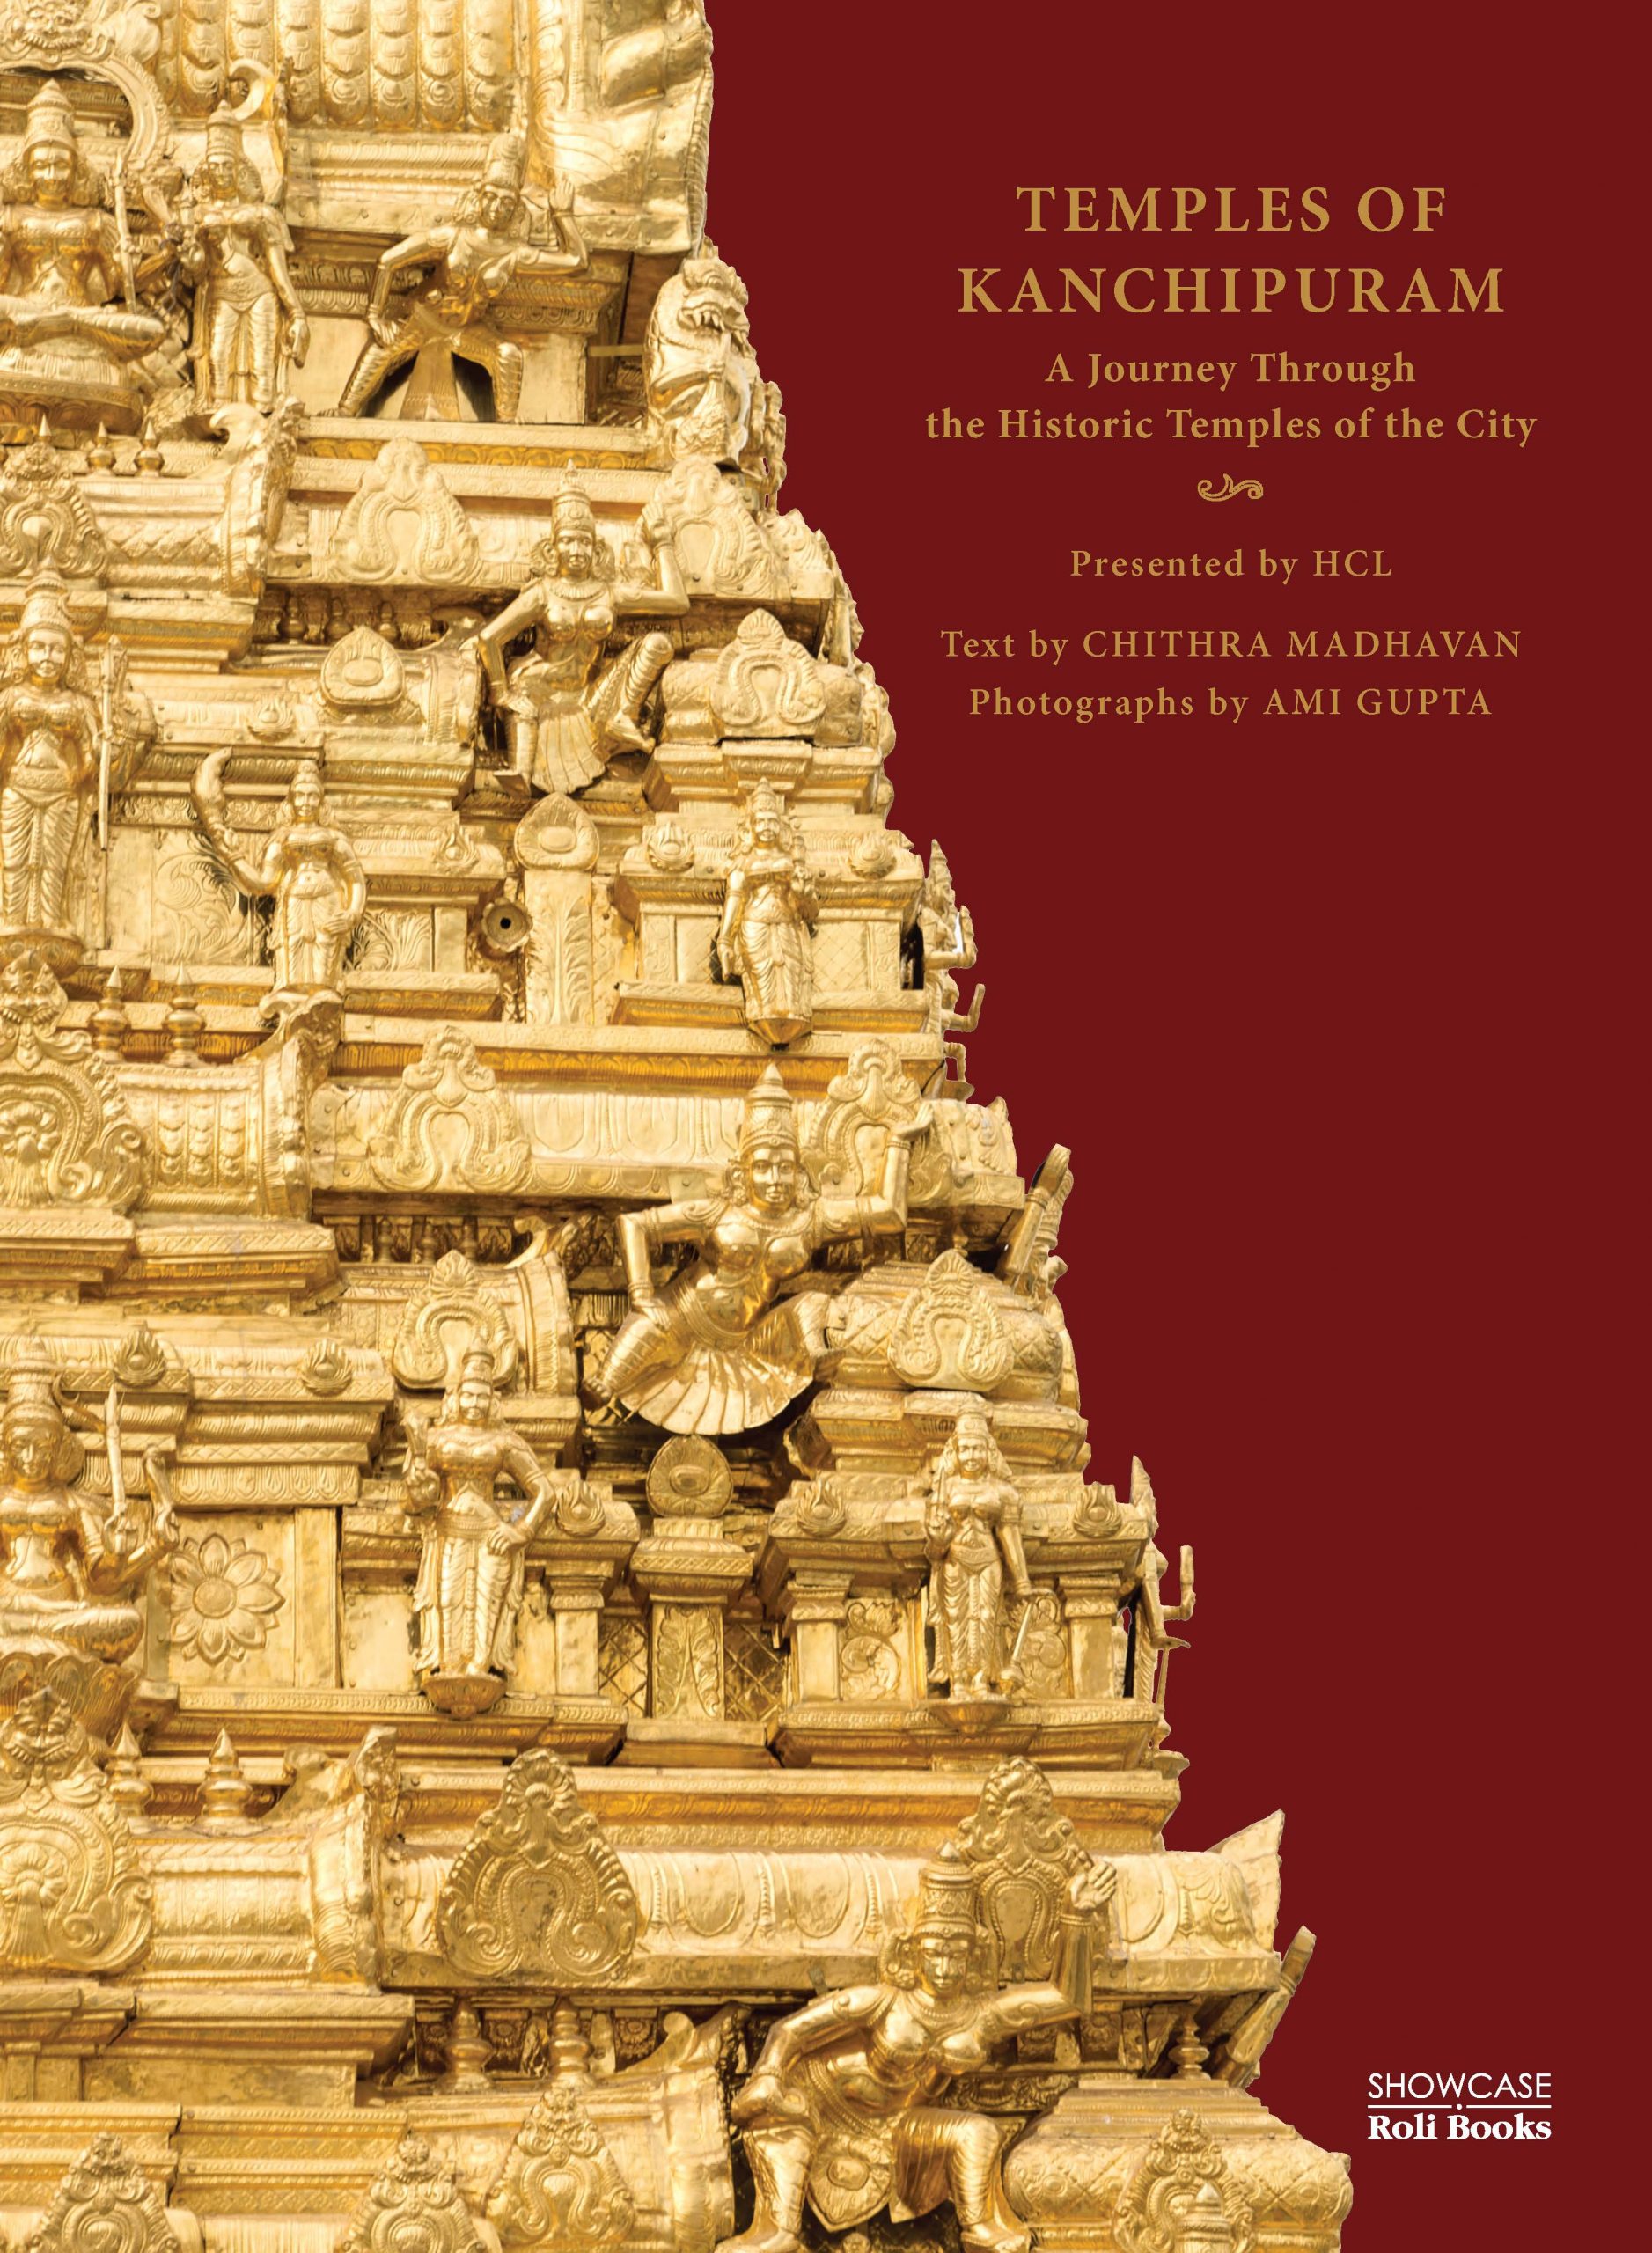 Pages_from_Temples_of_Kanchipuram_22_10_2018_Lowres-scaled-1-1.jpg